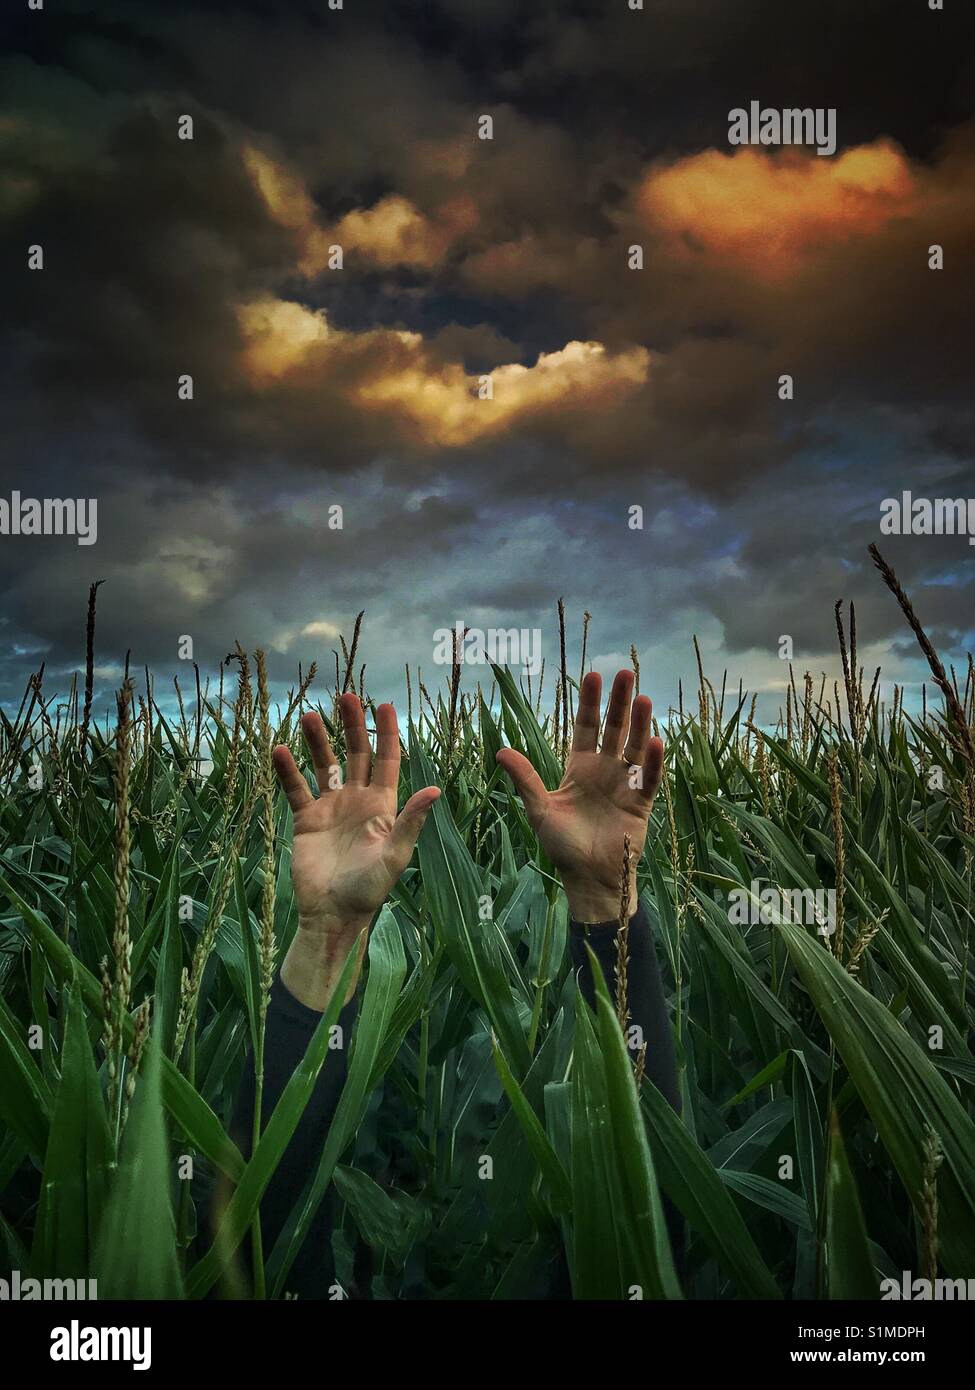 A pair of human hands reaching up skywards to a dramatic, stormy sky for help as if drowning in a field of tall maize. Stock Photo